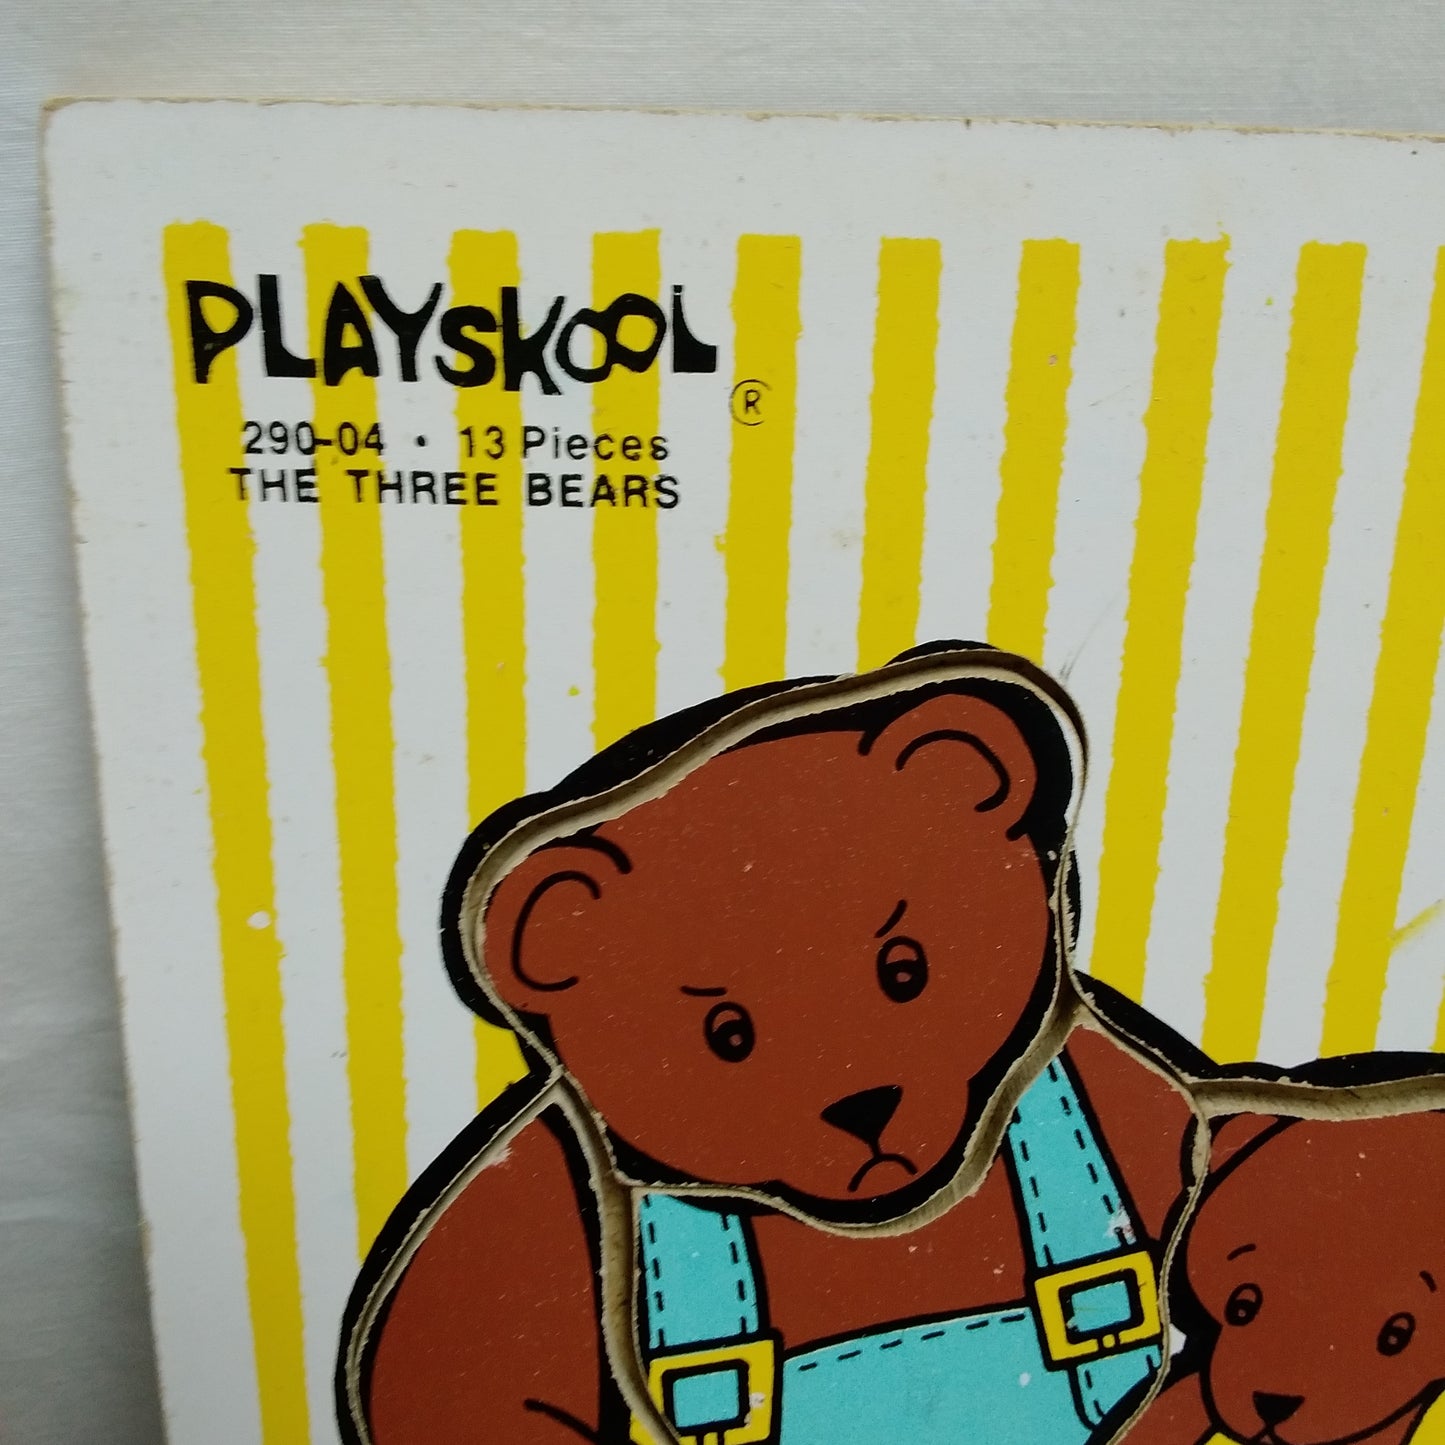 Vintage Playskool Wooden Puzzles - Lot of 3 (each puzzle is missing pieces)